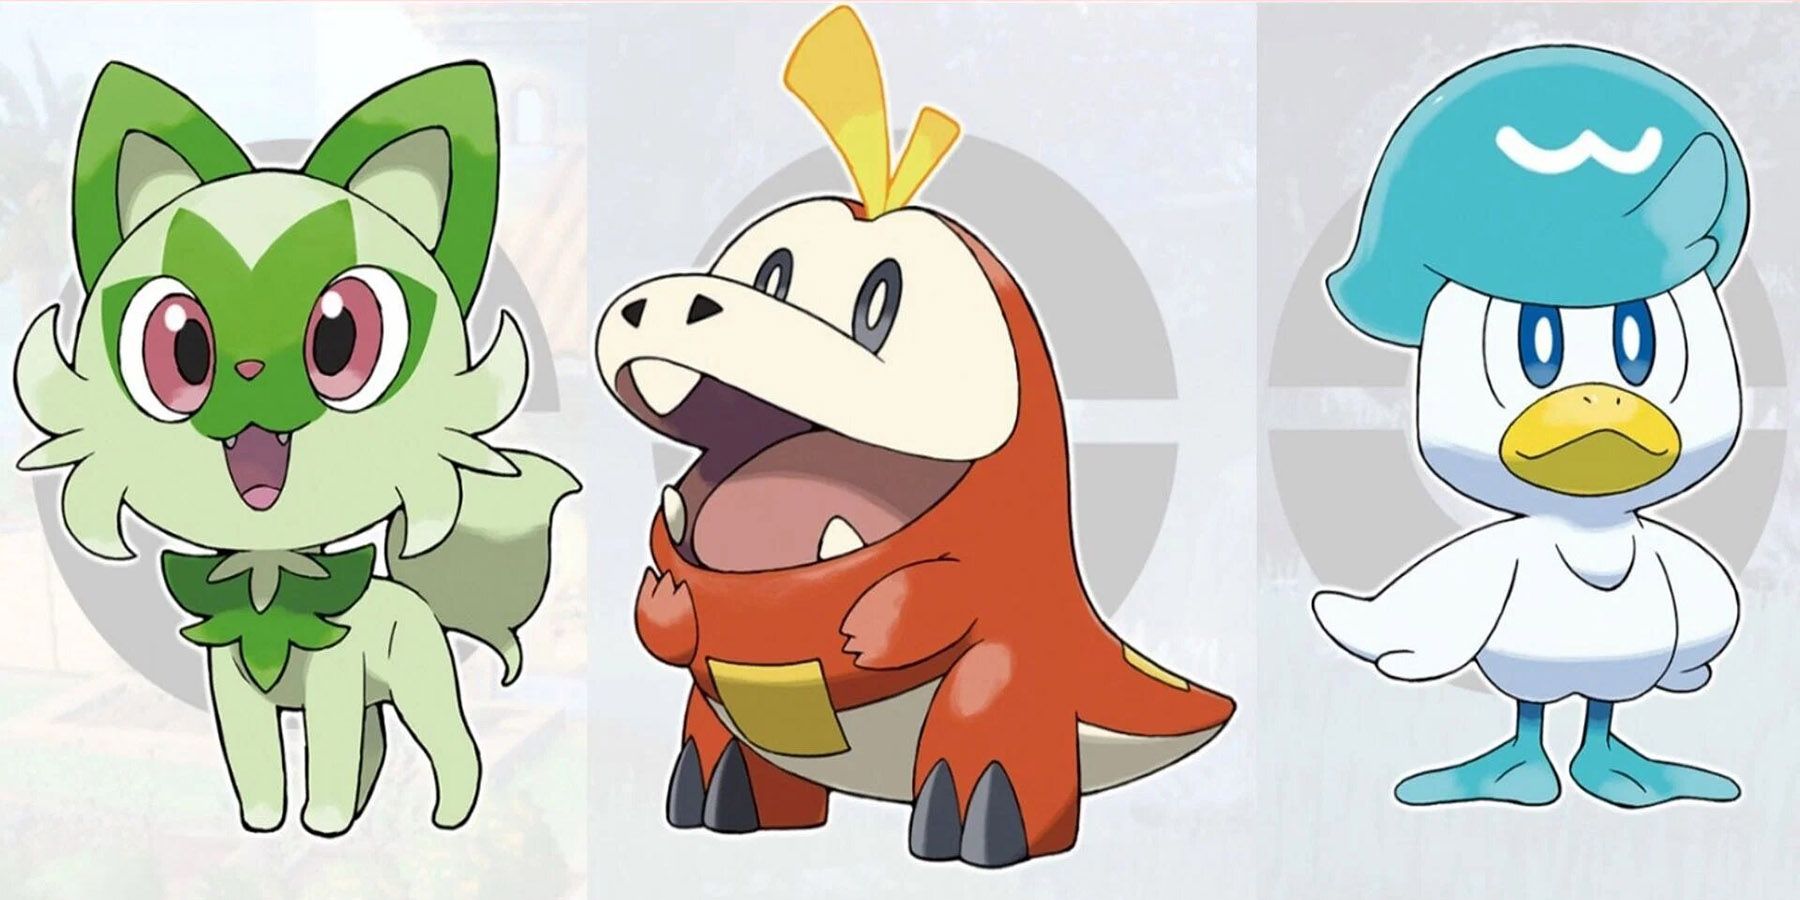 How to get the Galar starters in Pokemon Scarlet and Violet